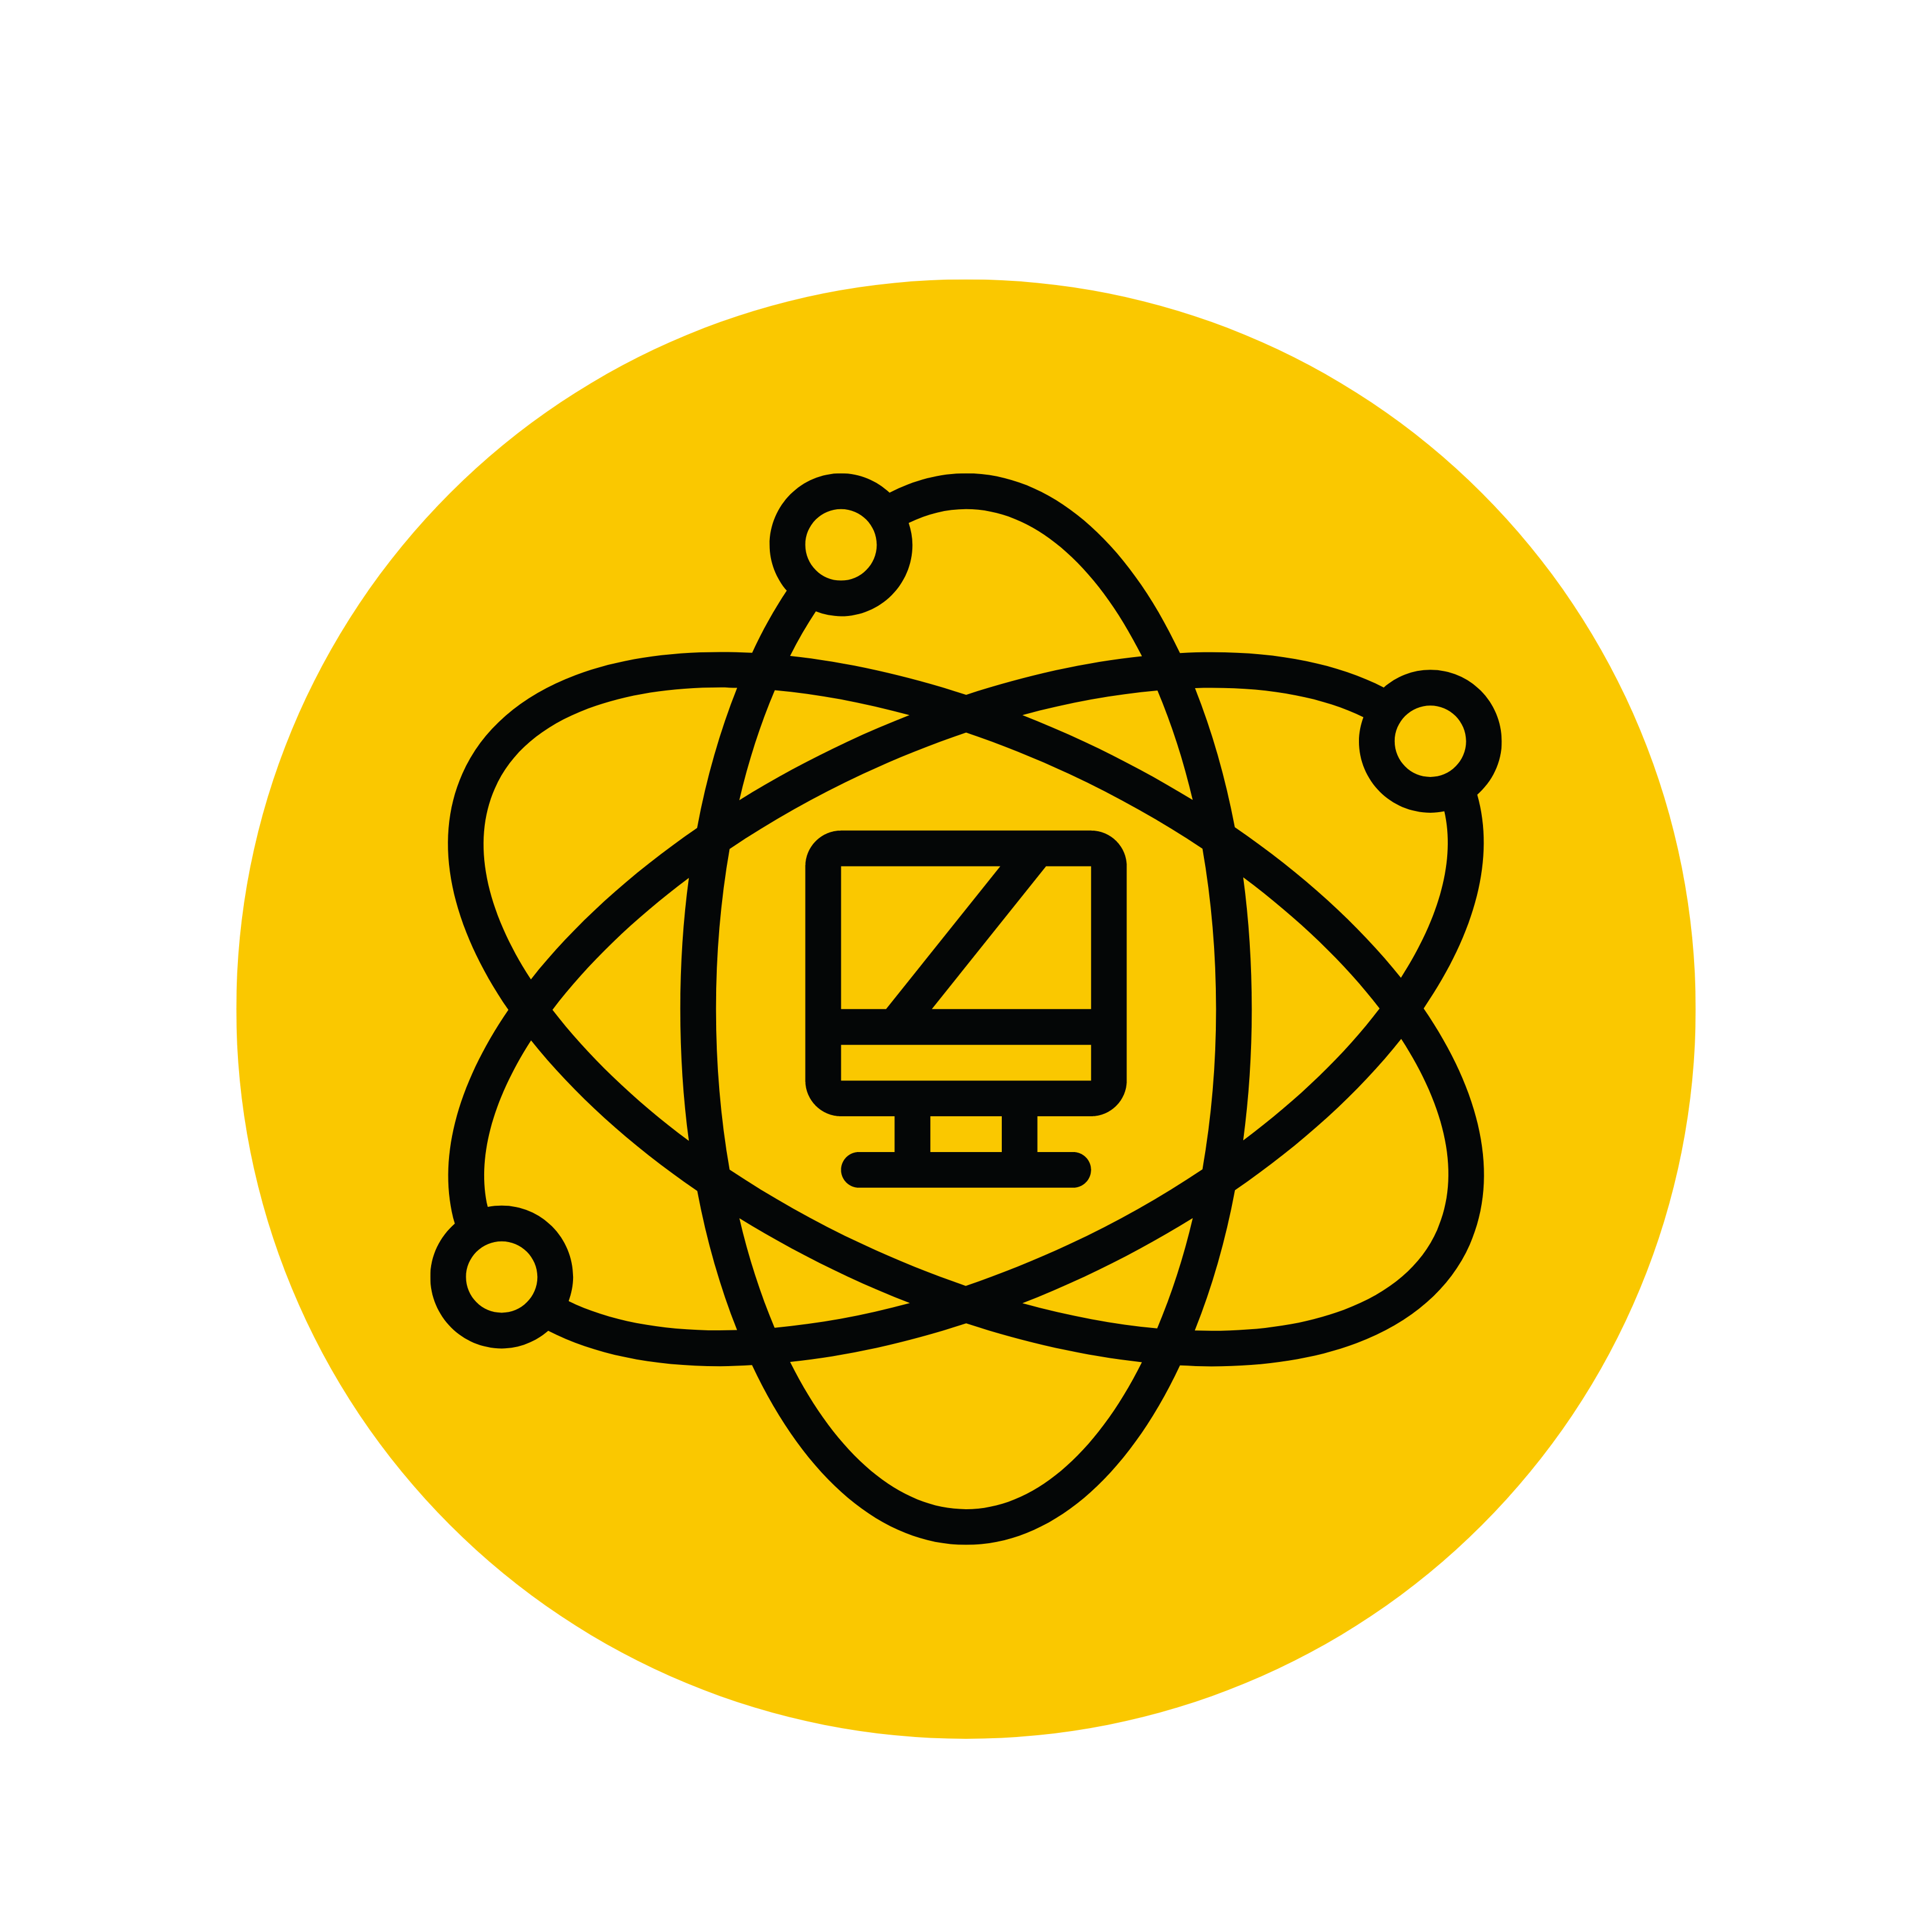 yellow background and black icon of nucleus with the computer in the center